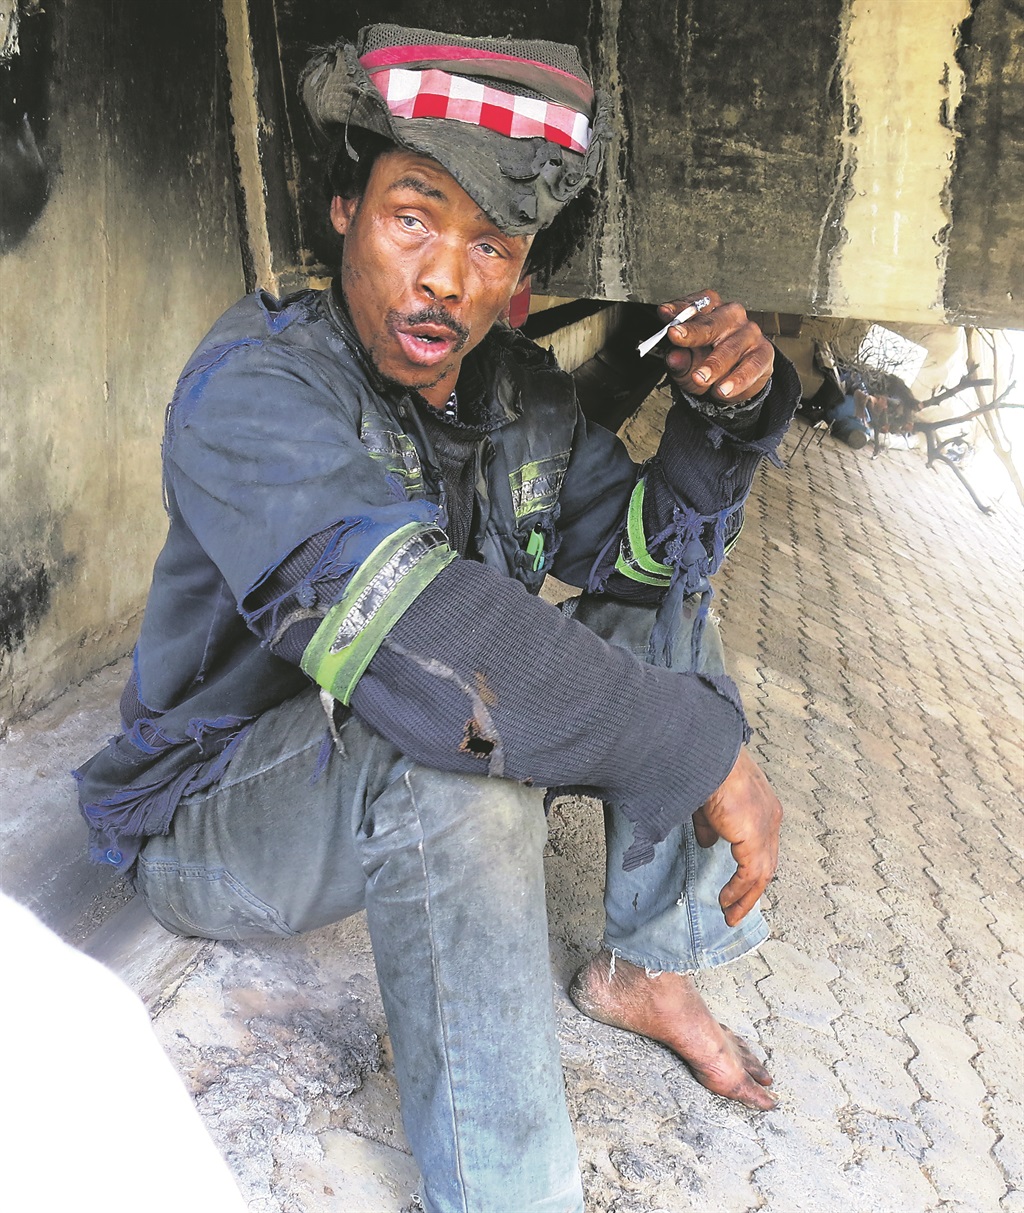 Jan Mokito claims he walked 140km to get away from the evil creature. Photo by Modise Tau